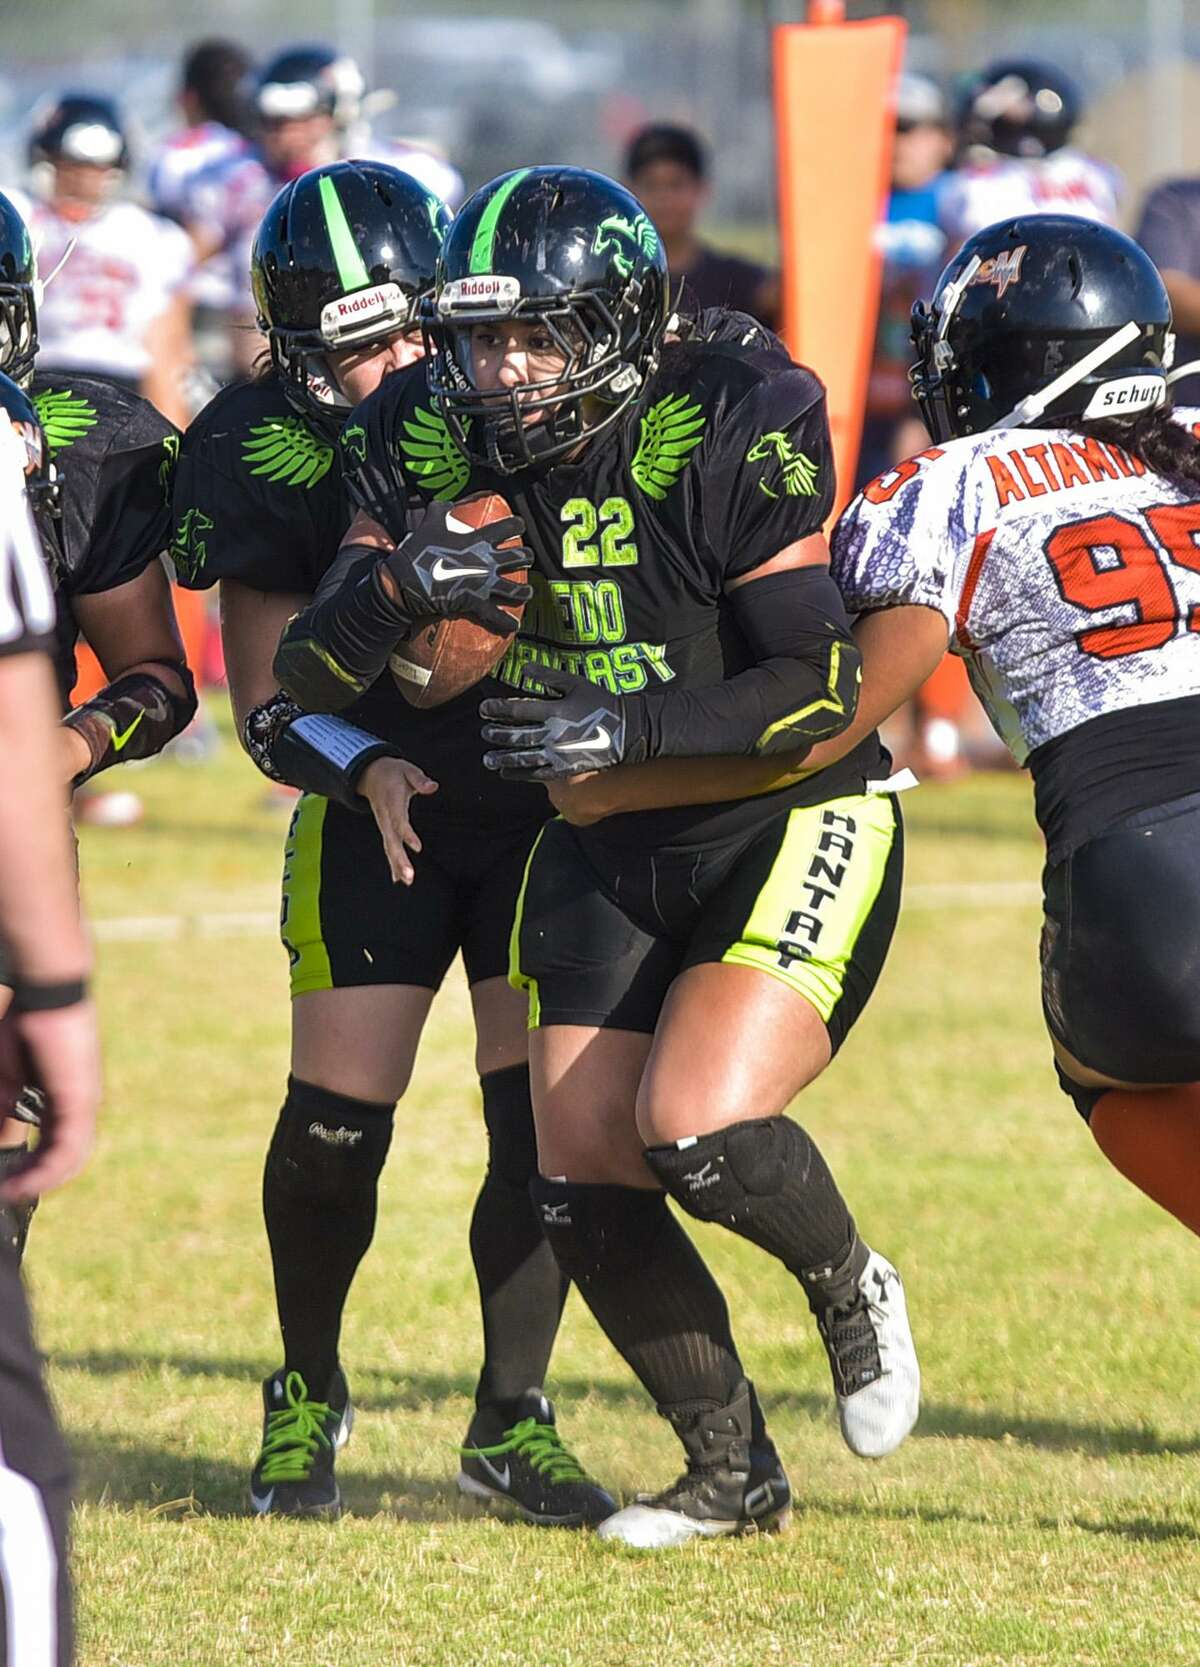 The Laredo Phantasy forfeited their game on Saturday against the Texas Lady Jaguars and dropped to 0-5.